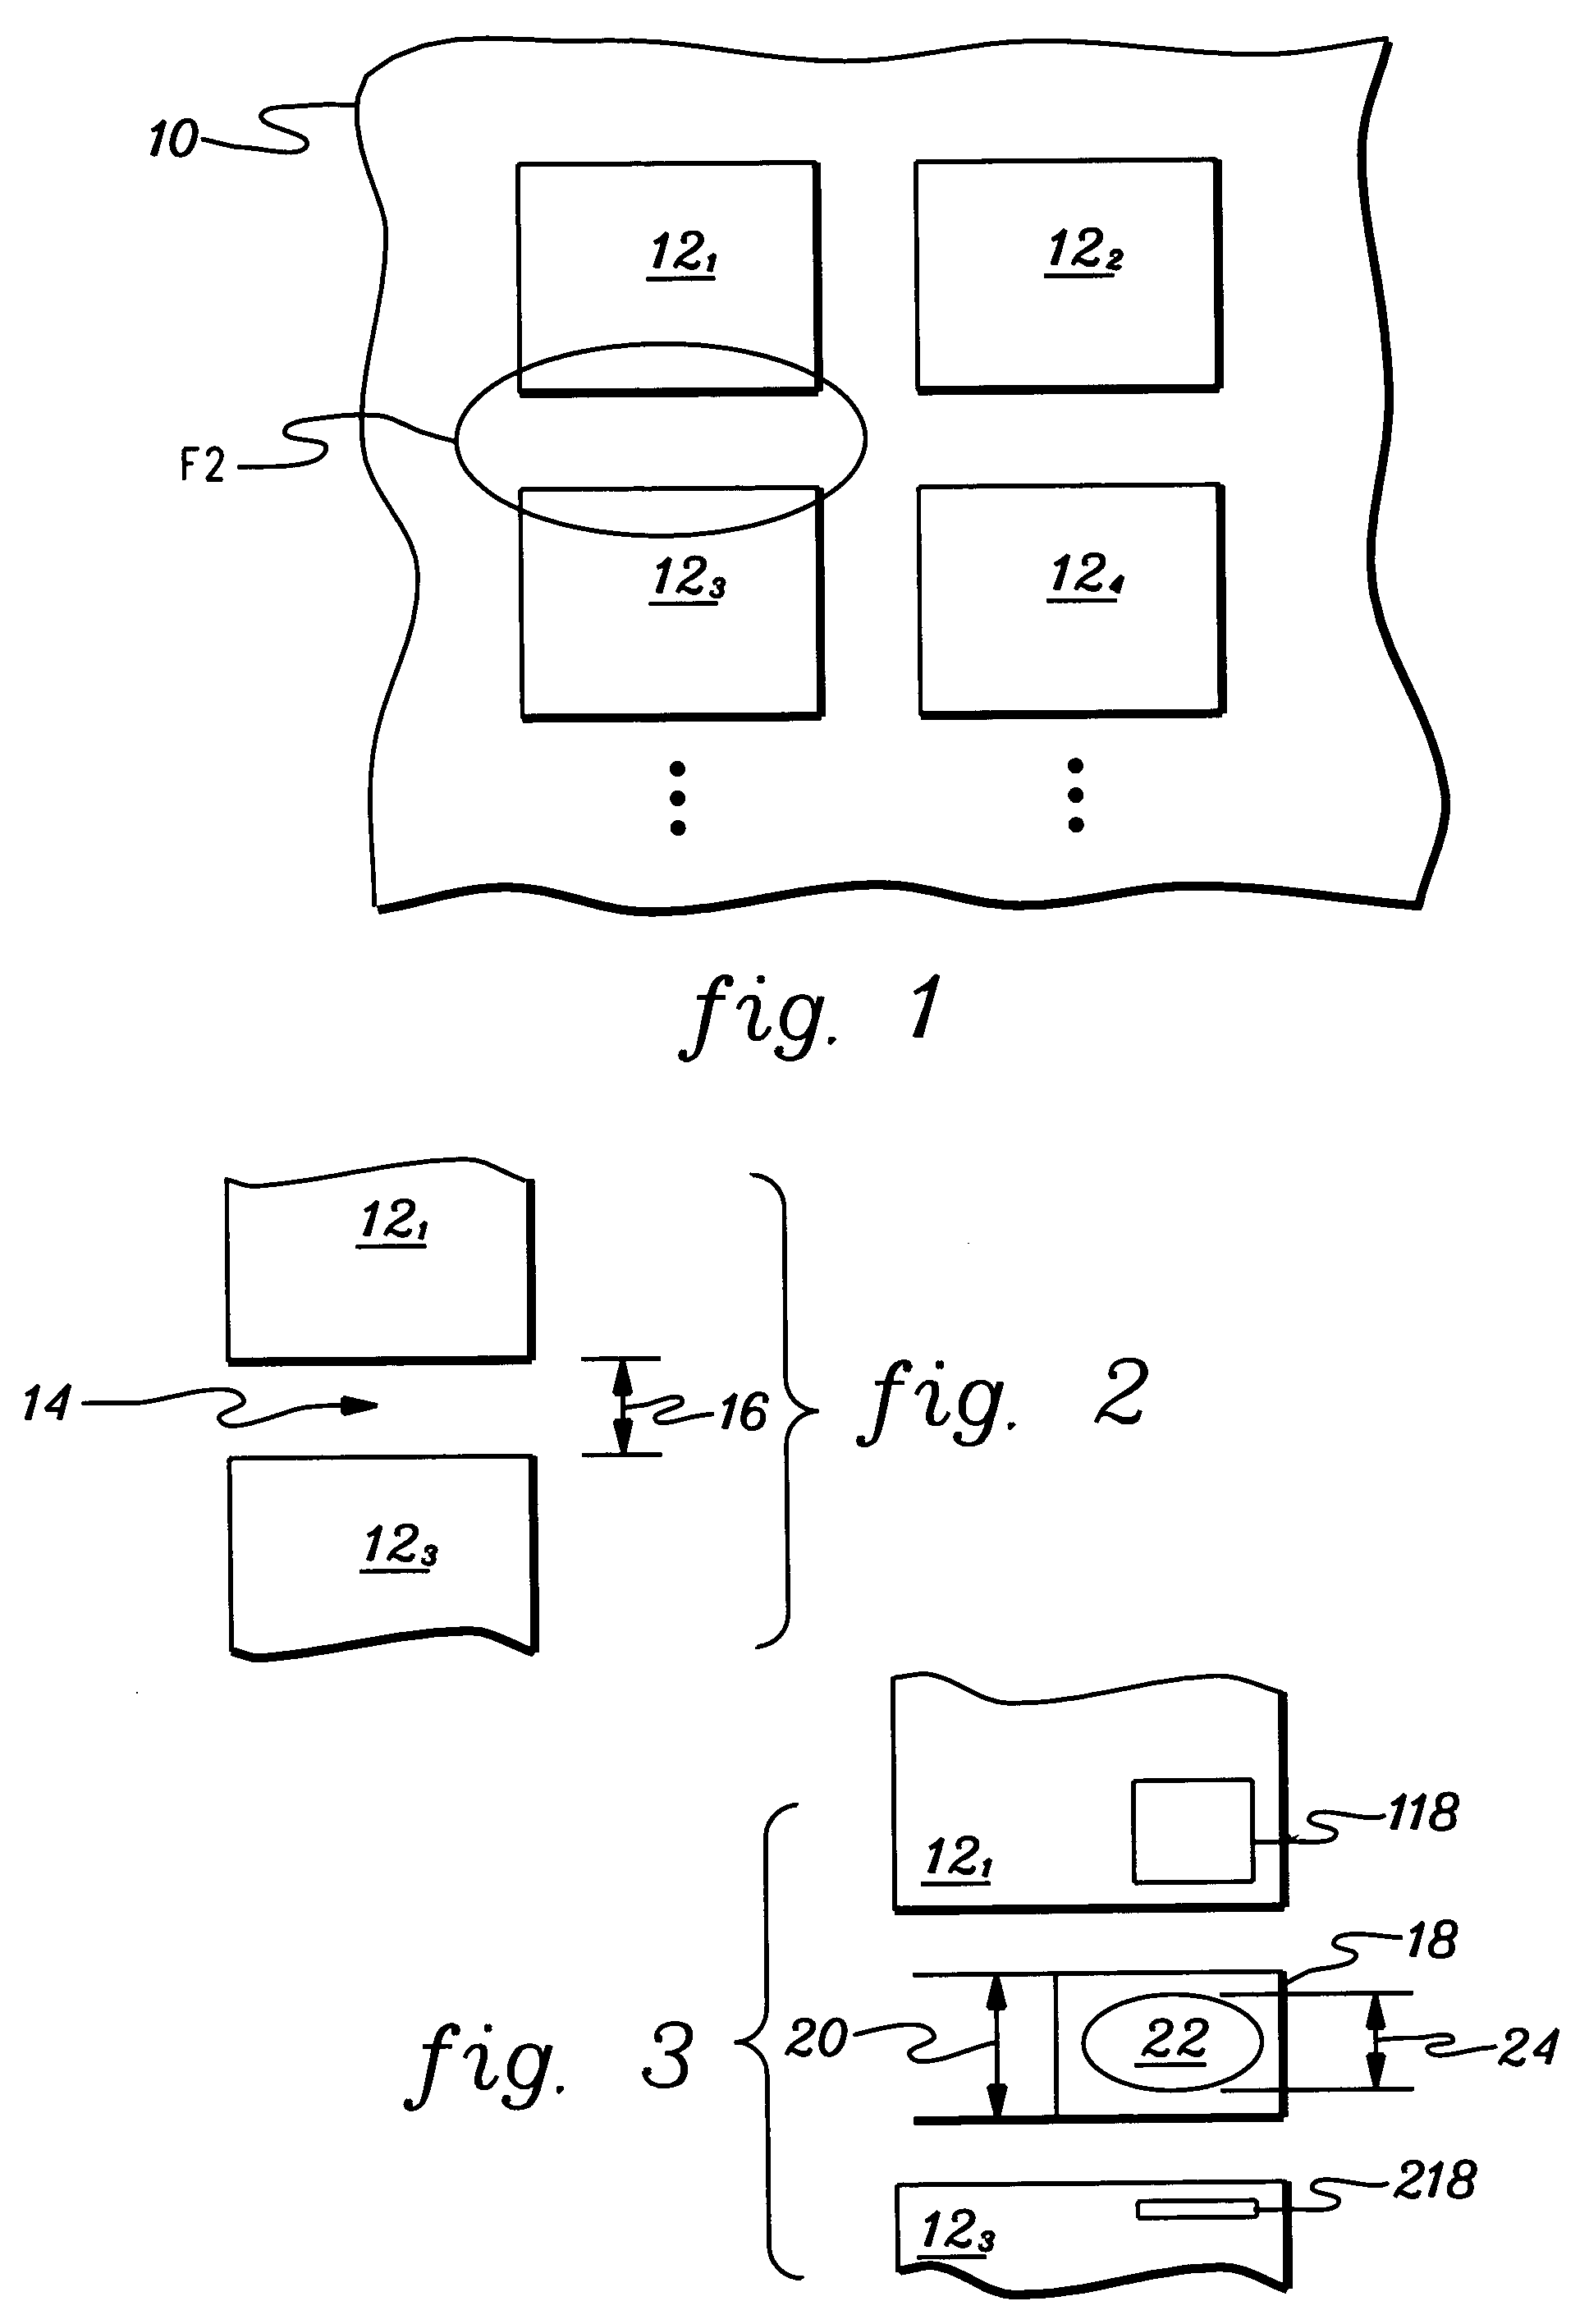 X-ray fluorescence system with apertured mask for analyzing patterned surfaces